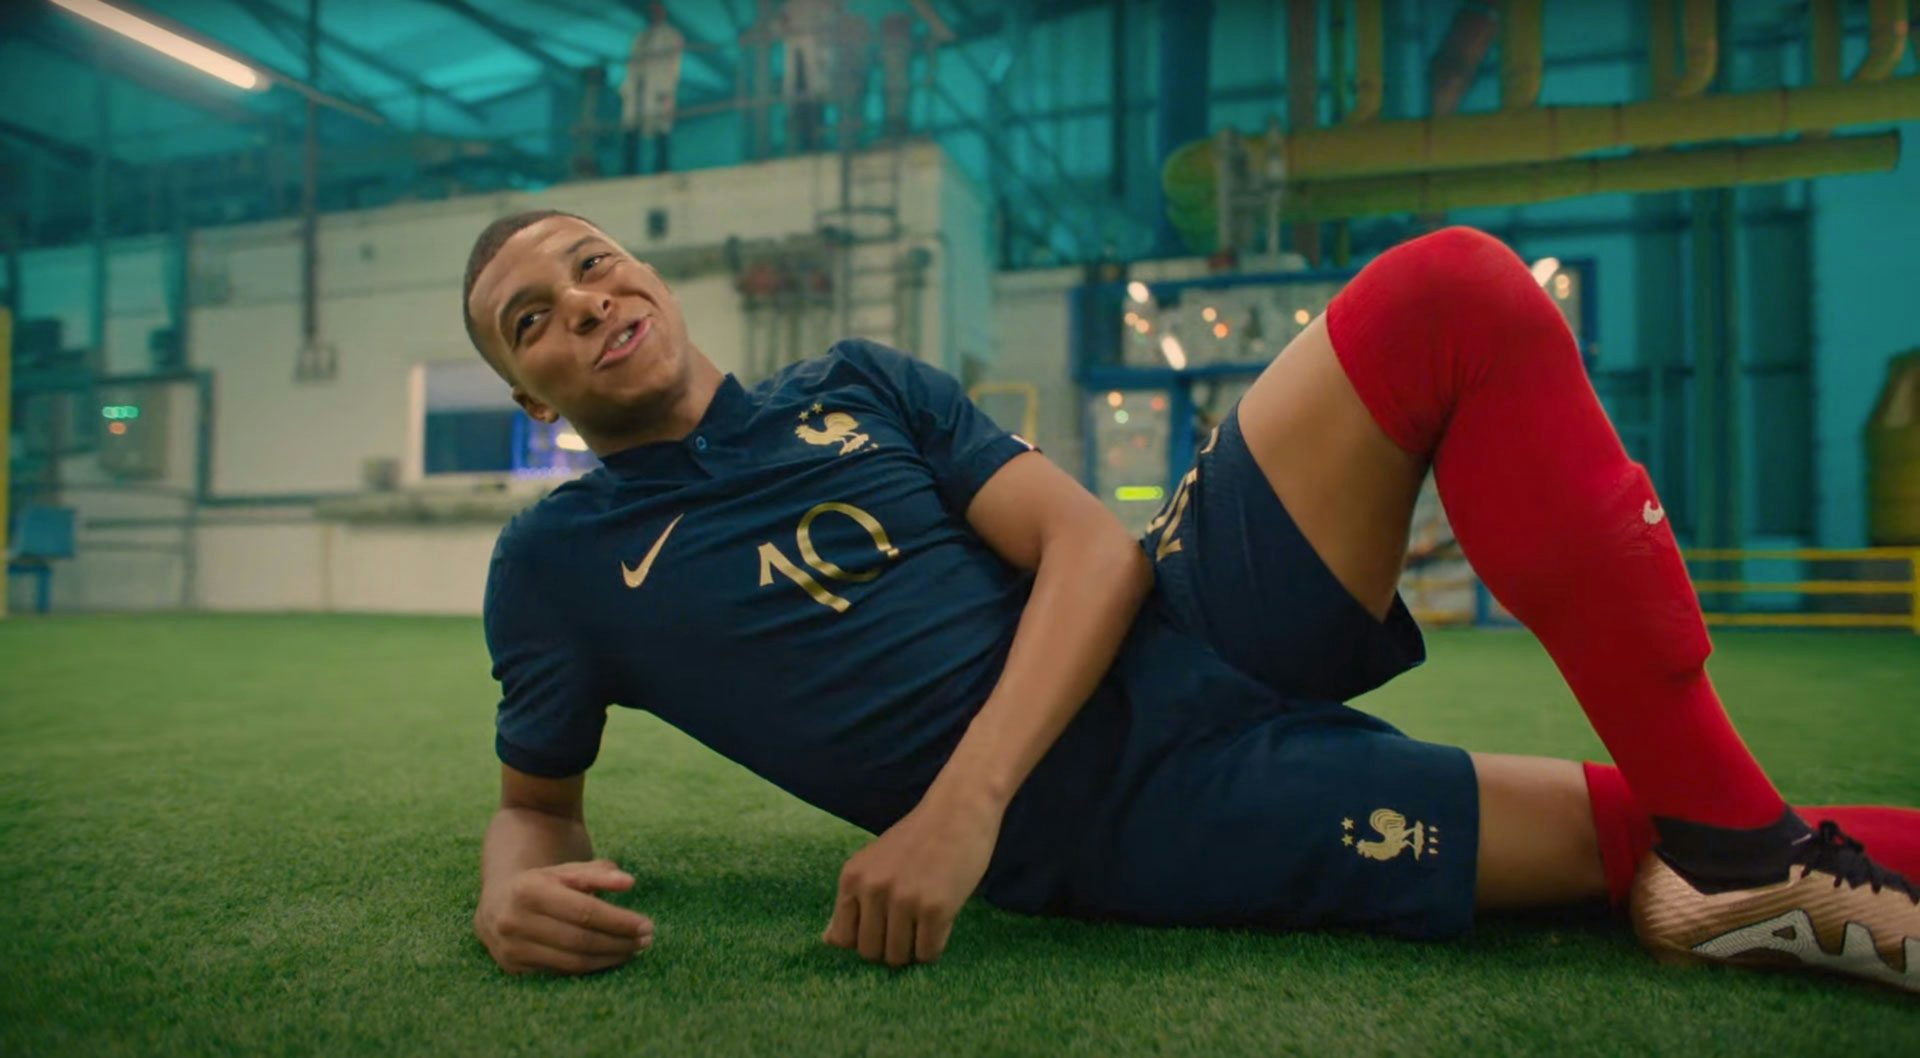 Nike enters the footballverse in its star-studded World Cup ad